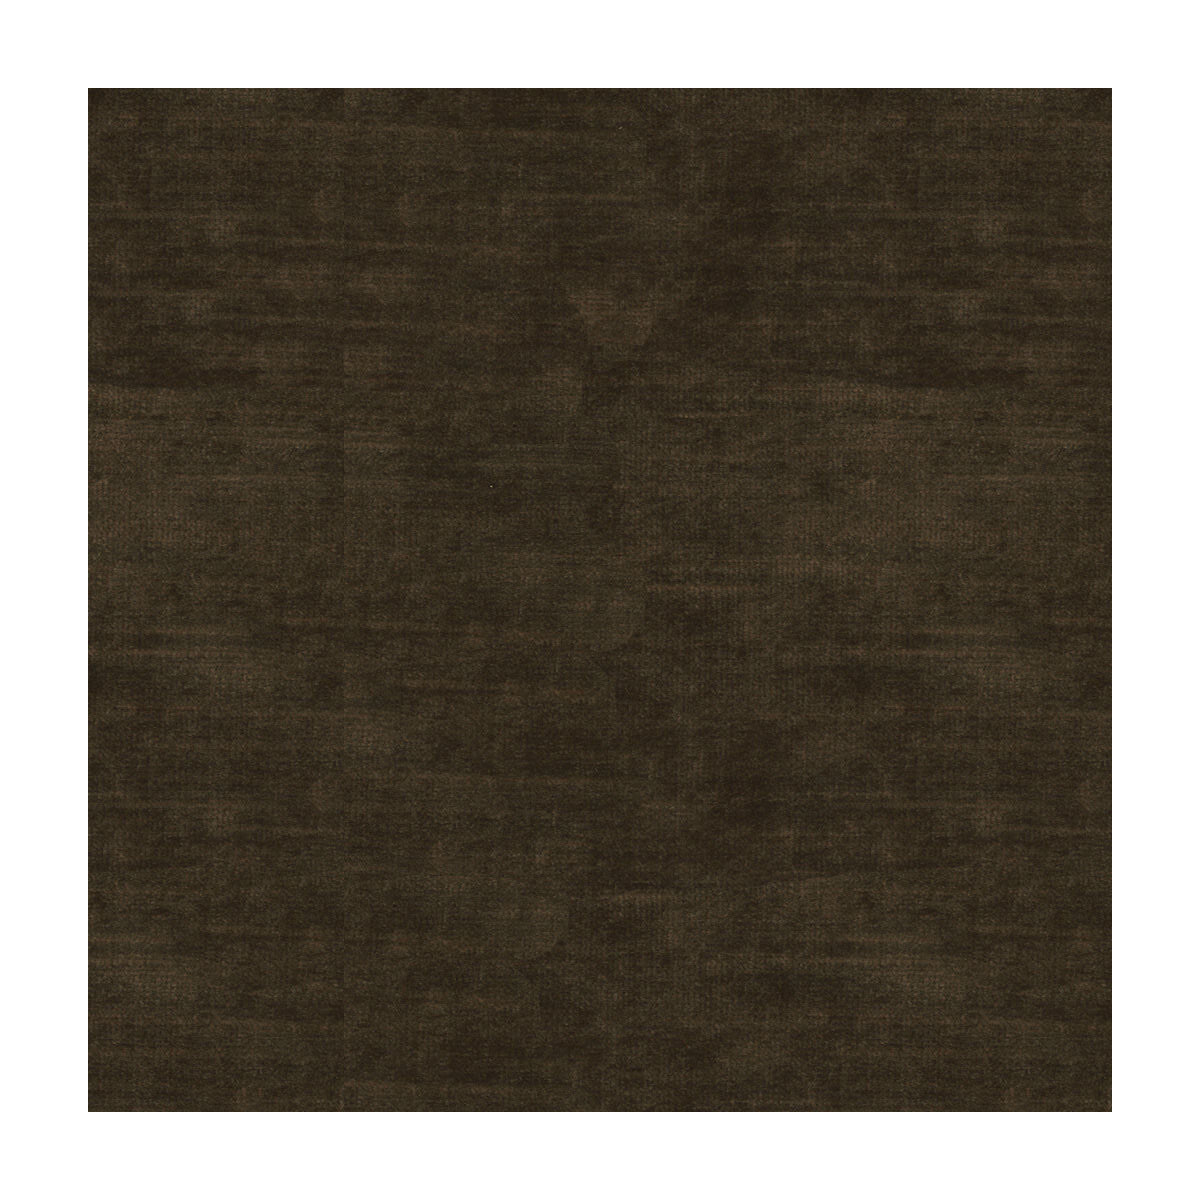 High Impact fabric in coffee color - pattern 34329.66.0 - by Kravet Couture